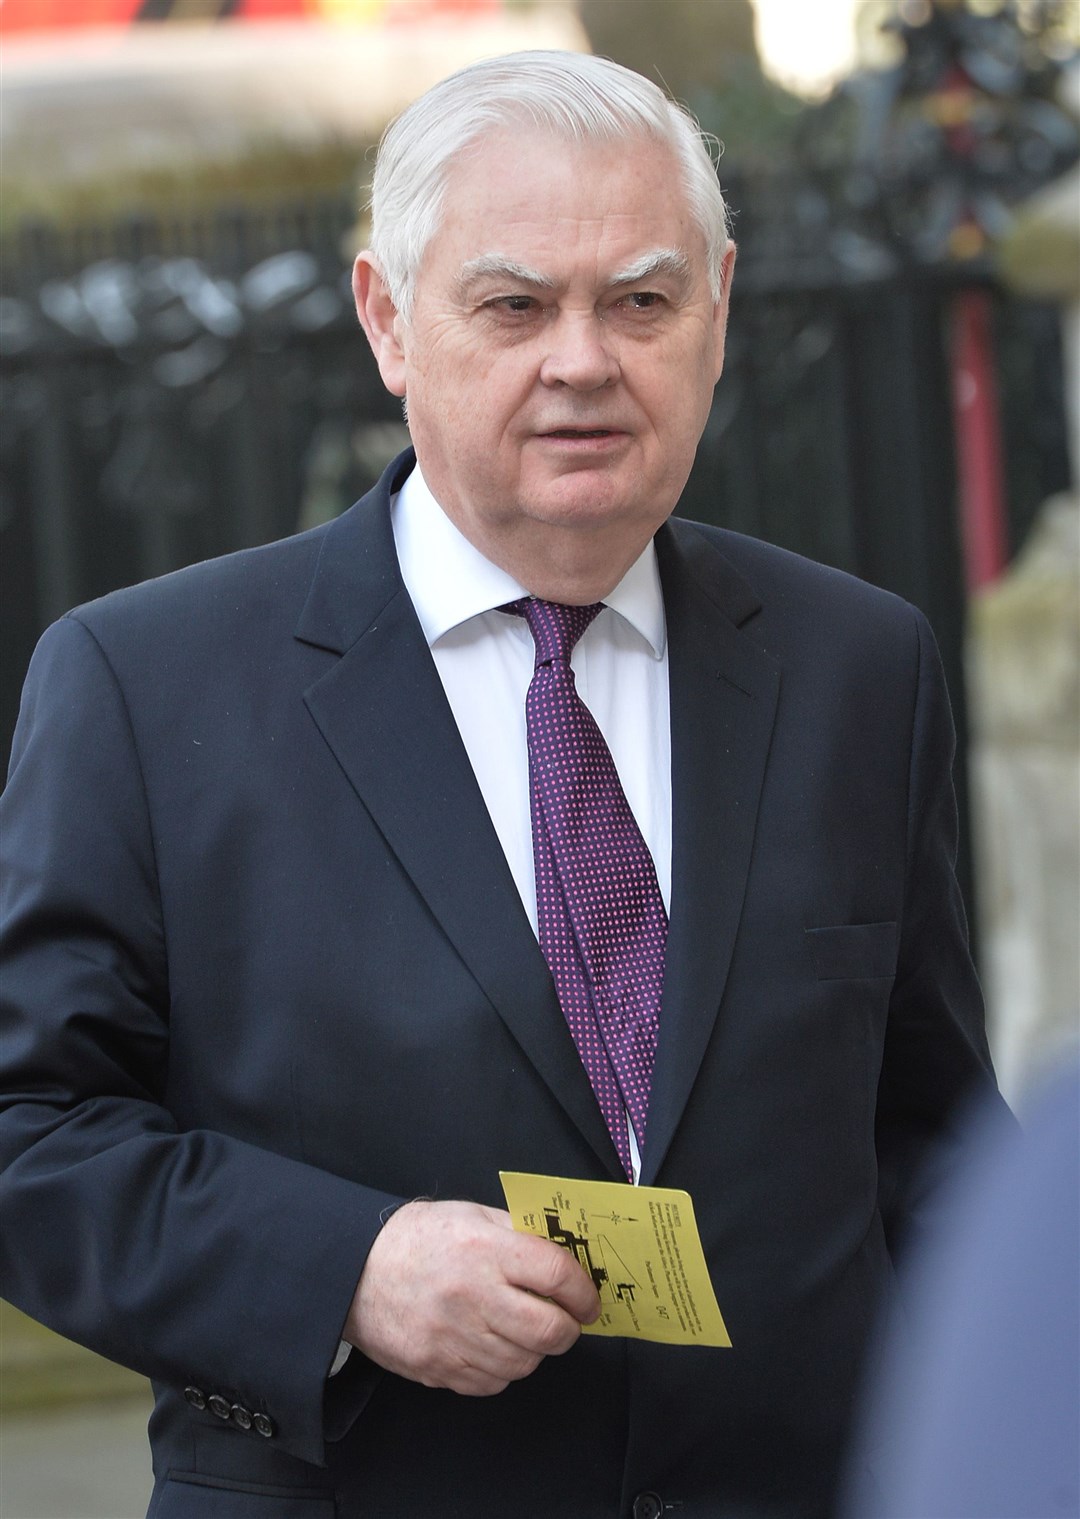 Lord Lamont said Mr Sunak has the courage to take ‘tough decisions’ on the economy (Anthony Devlin/PA)